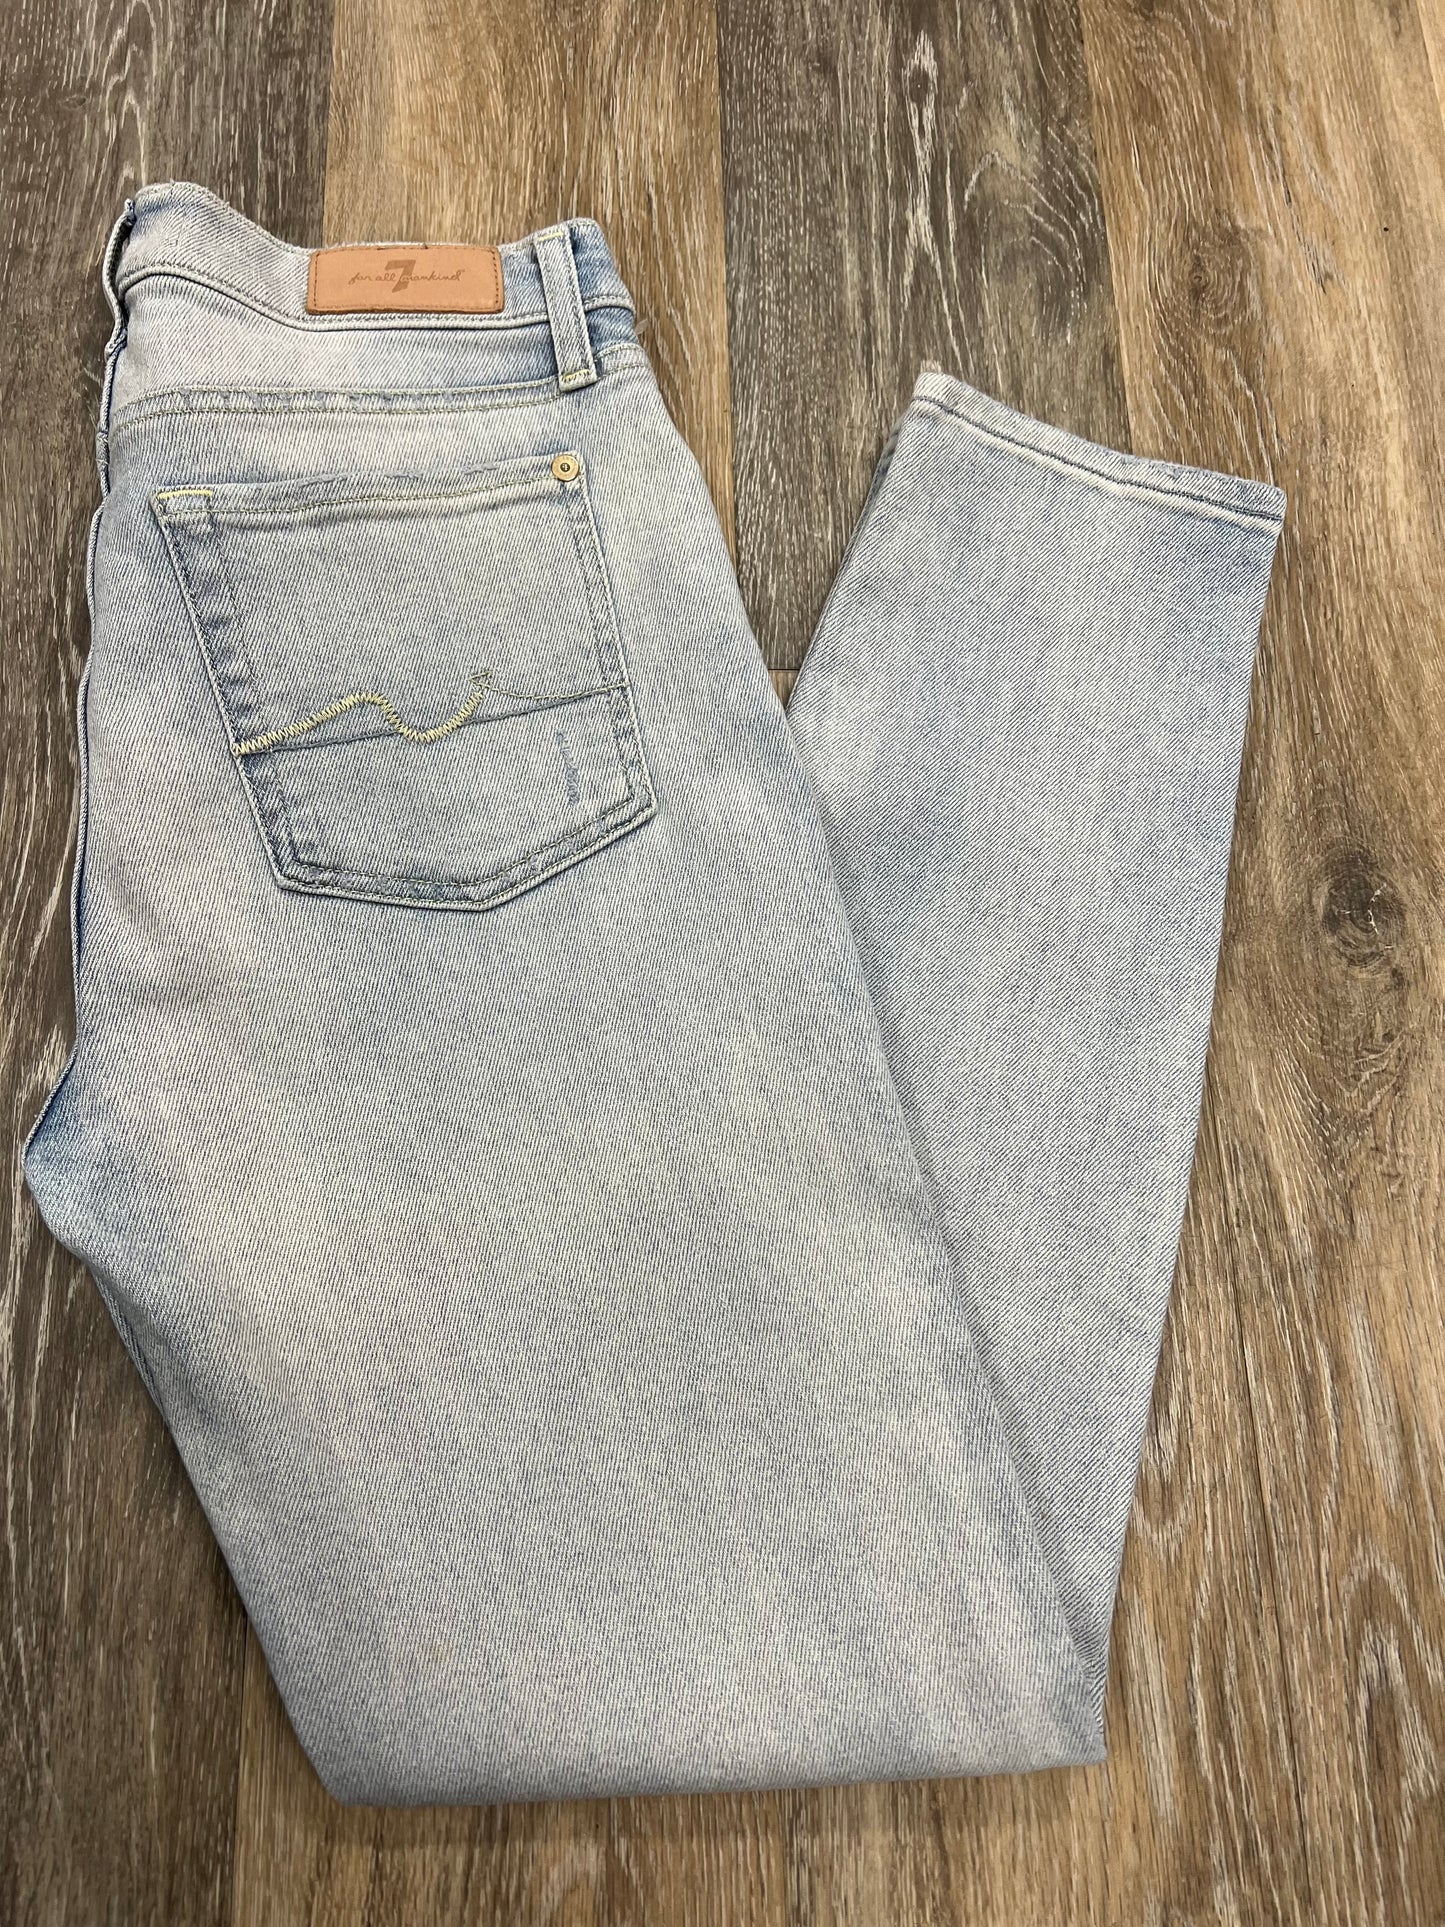 Jeans Designer By Seven For All Mankind  Size: 2/26